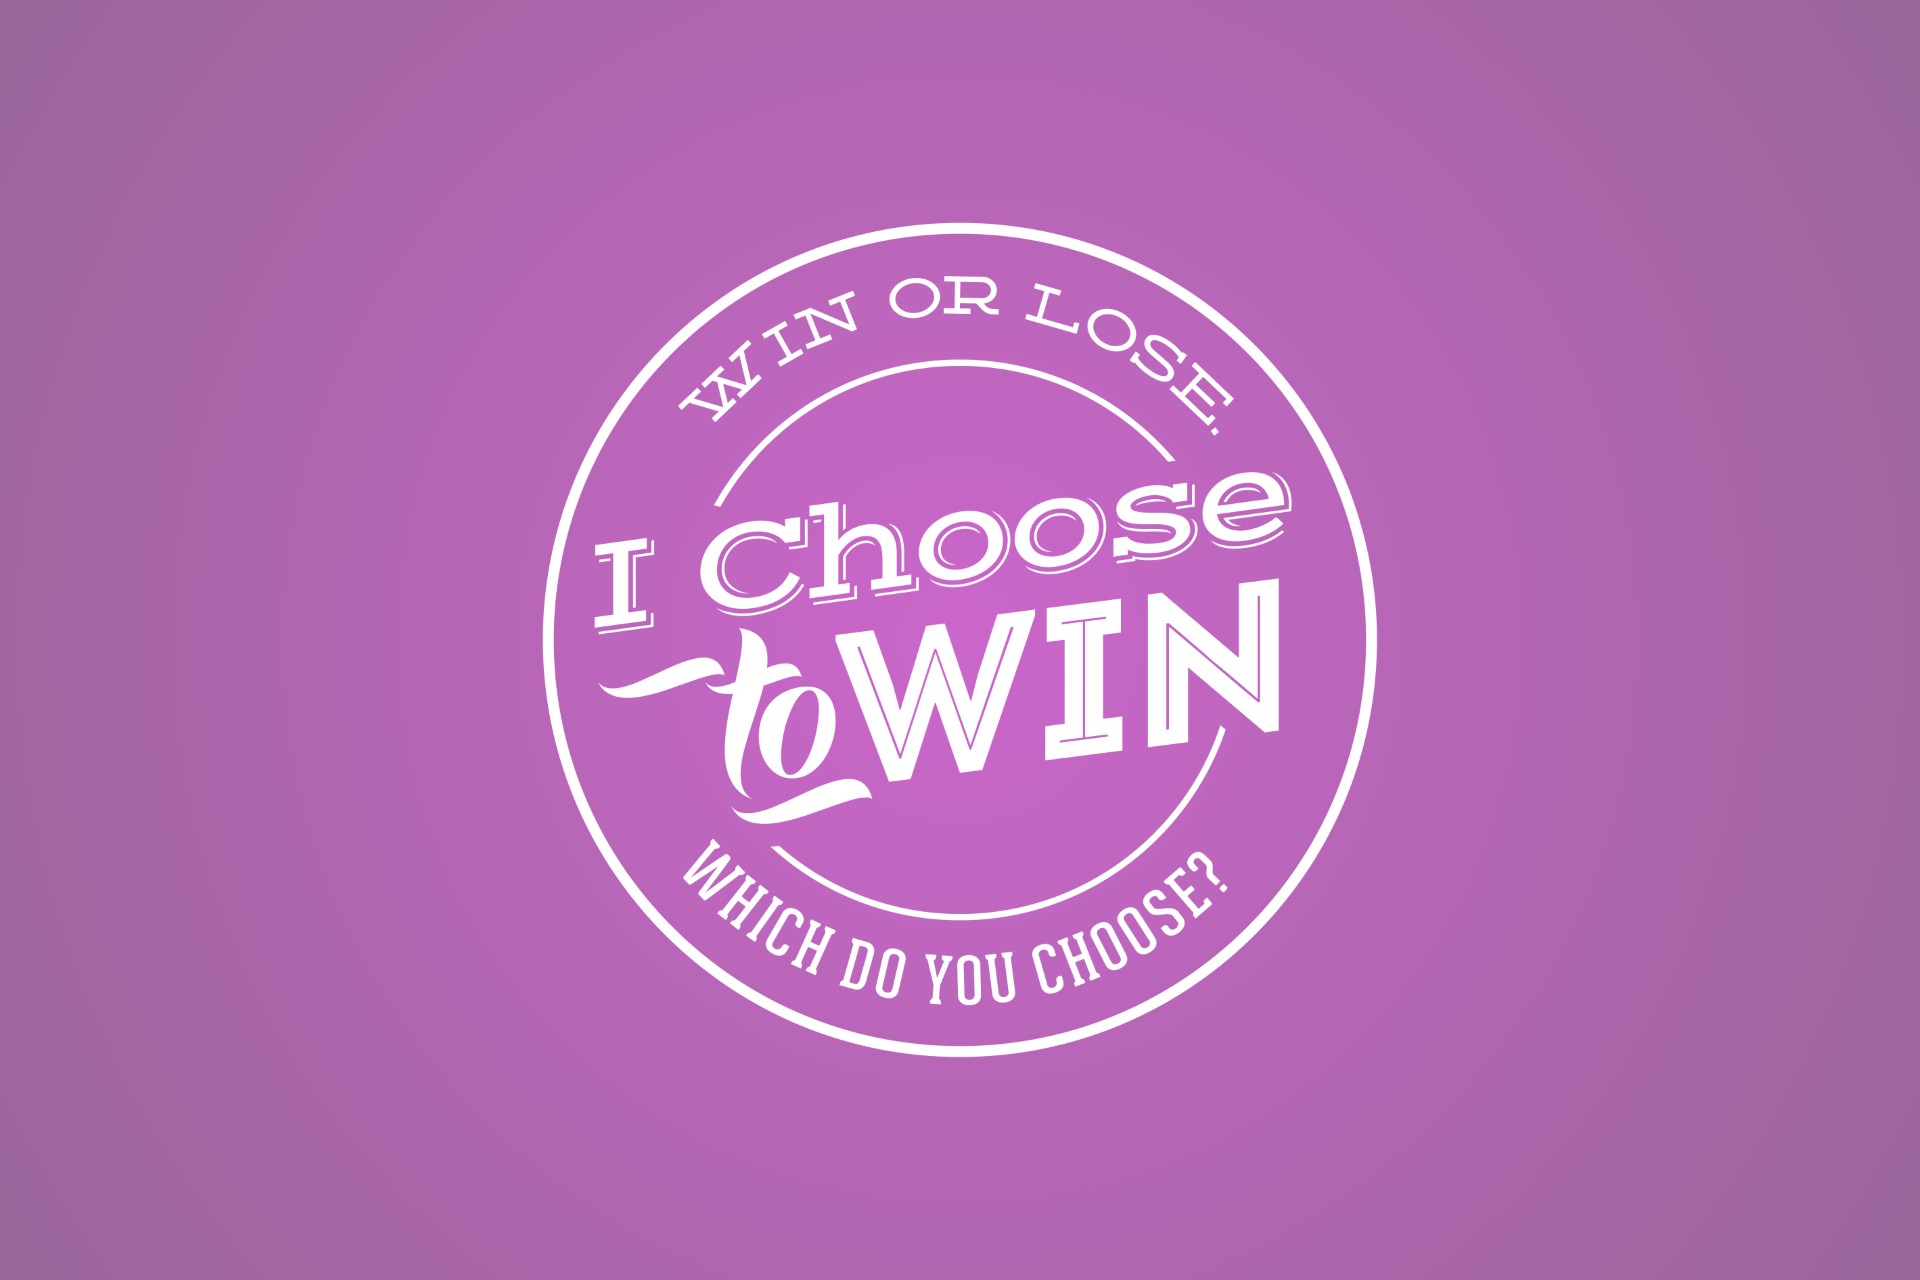 I Choose to Win logo with a purple background, featuring the words in white lettering 'win or lose, which do you choose?'